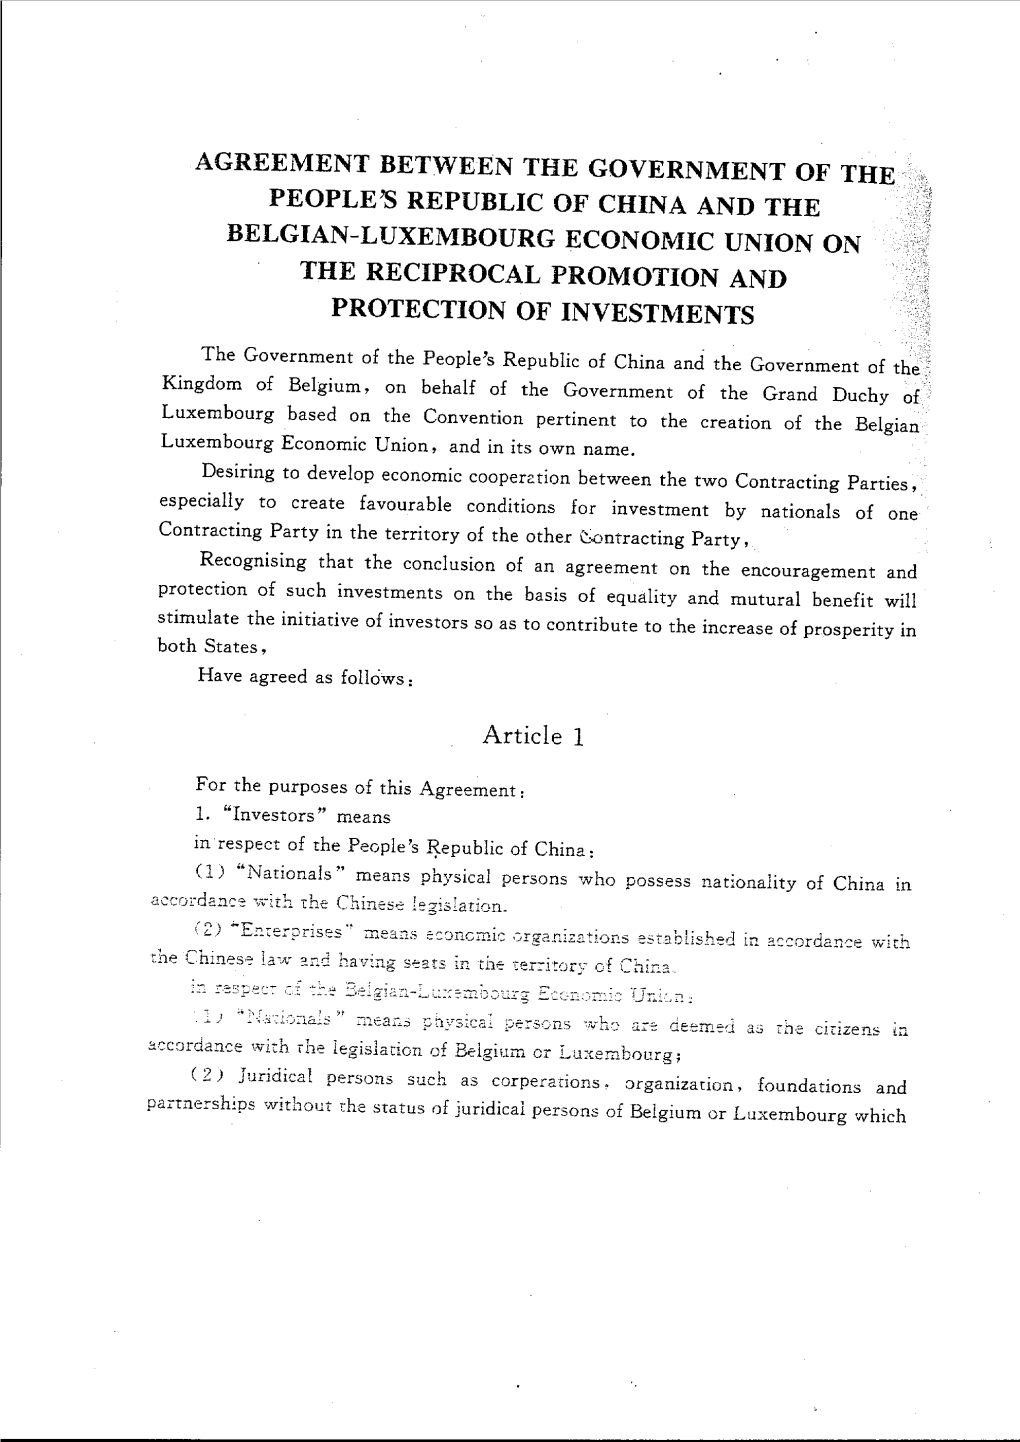 Agreement Between the Government of the People's Republic of China and the Belgian-Luxembourg Economic Union on the Reciprocal P